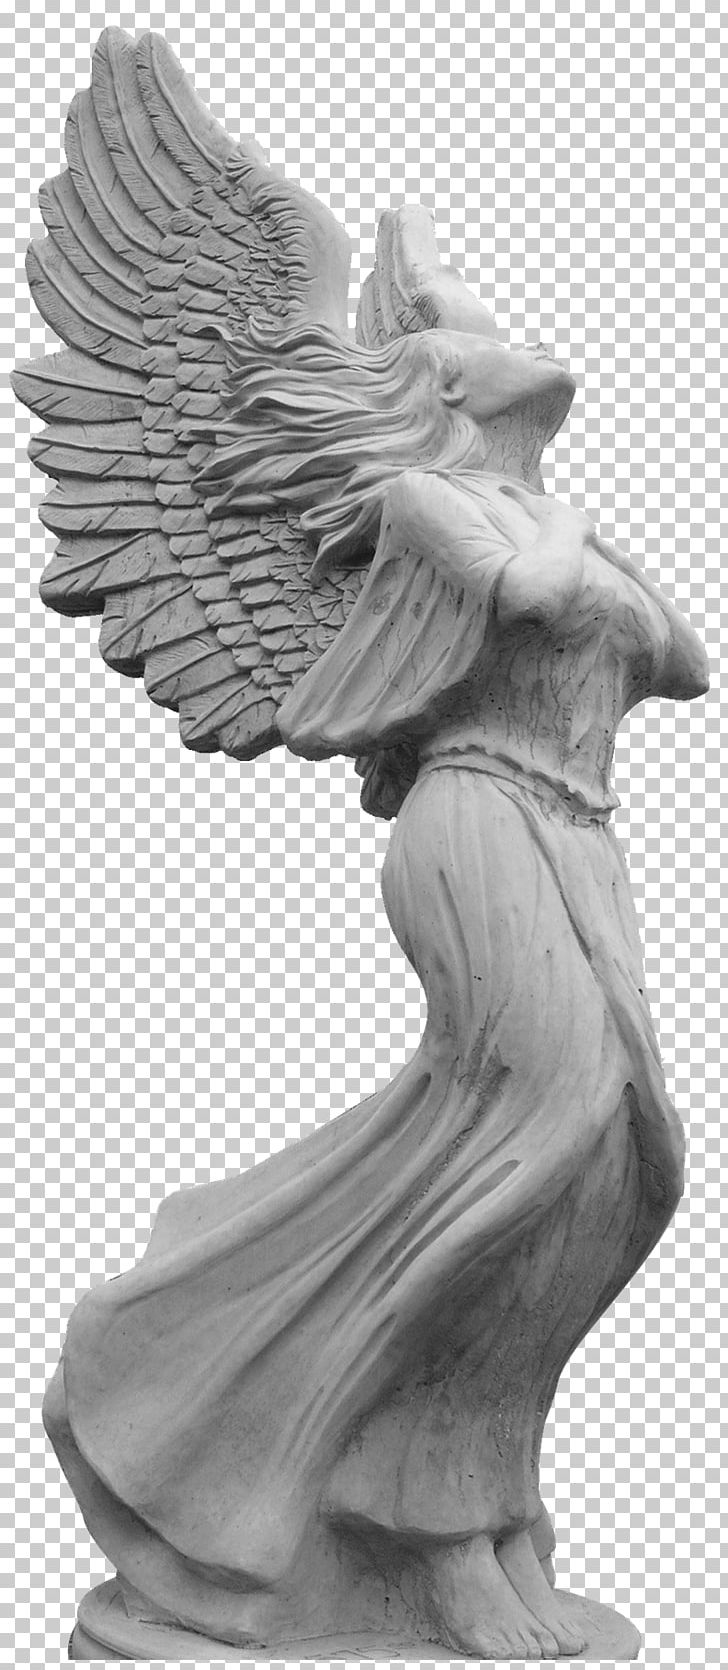 Classical Sculpture Black And White Monochrome Photography Stone Carving PNG, Clipart, Art, Artwork, Black And White, Bust, Carving Free PNG Download